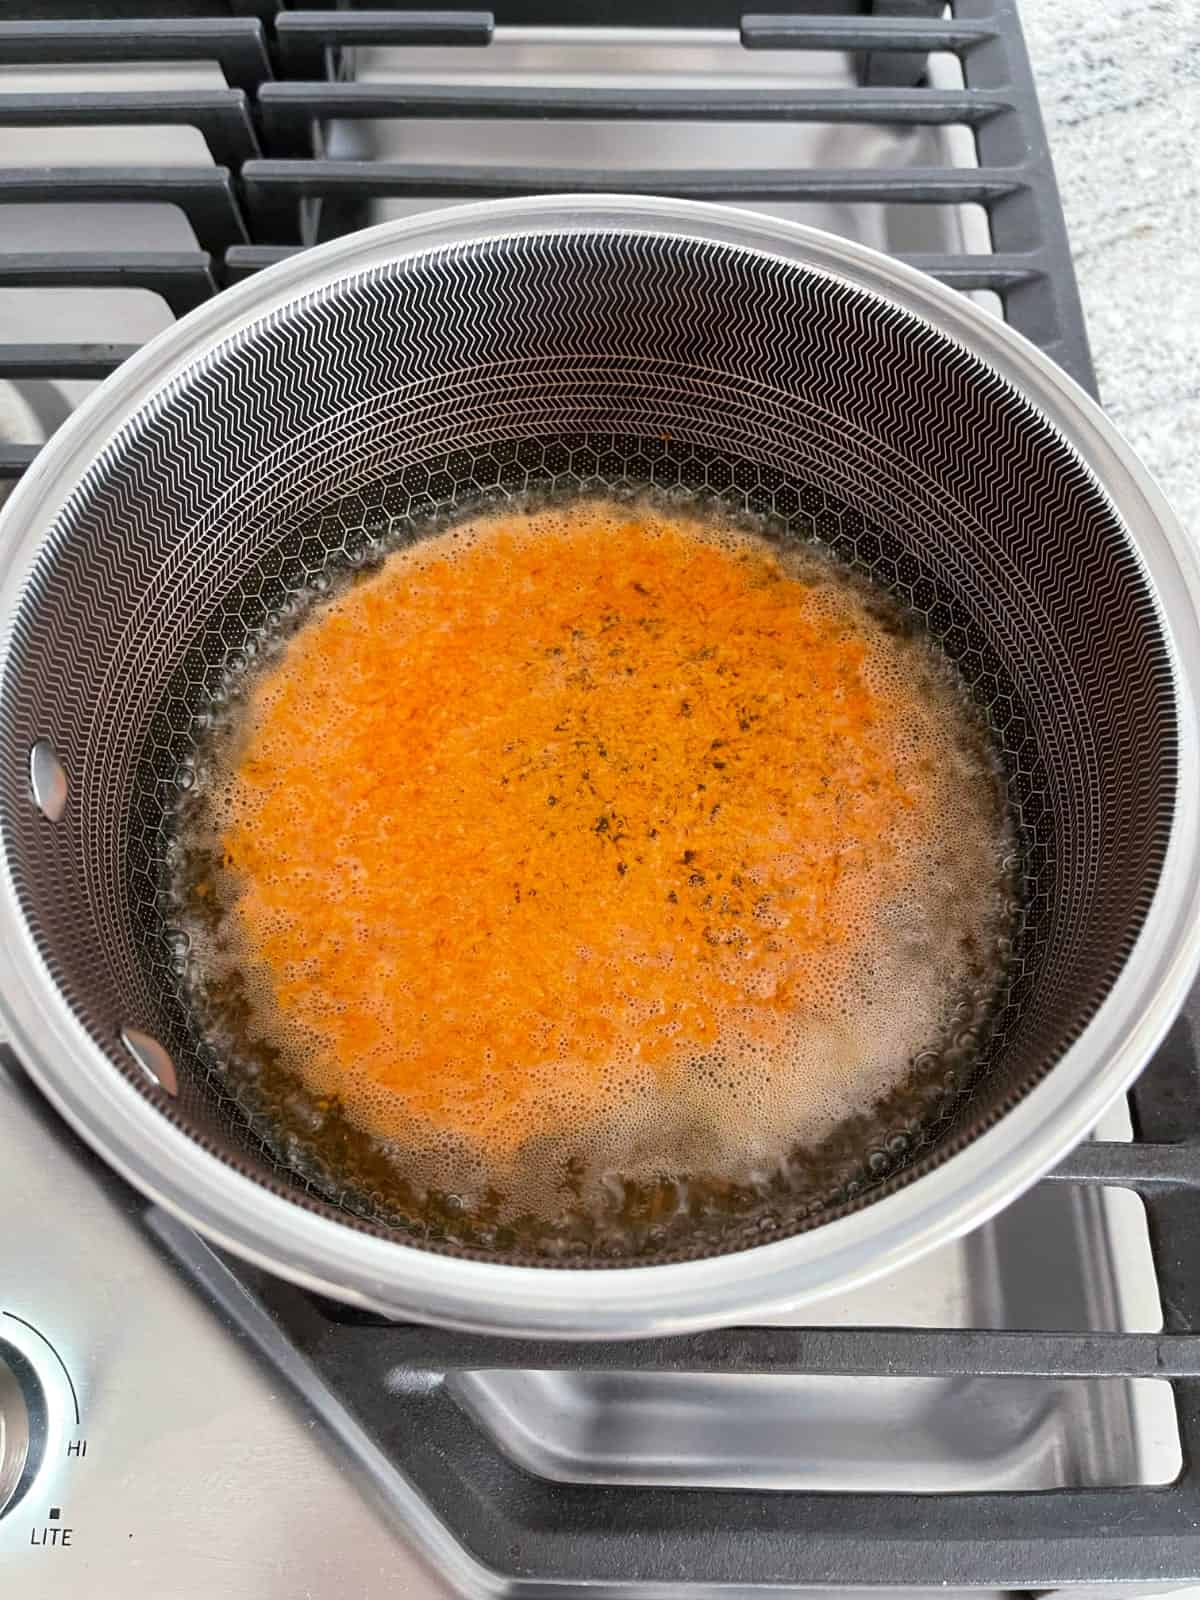 Simmering grated carrots in saucepan on stovetop.